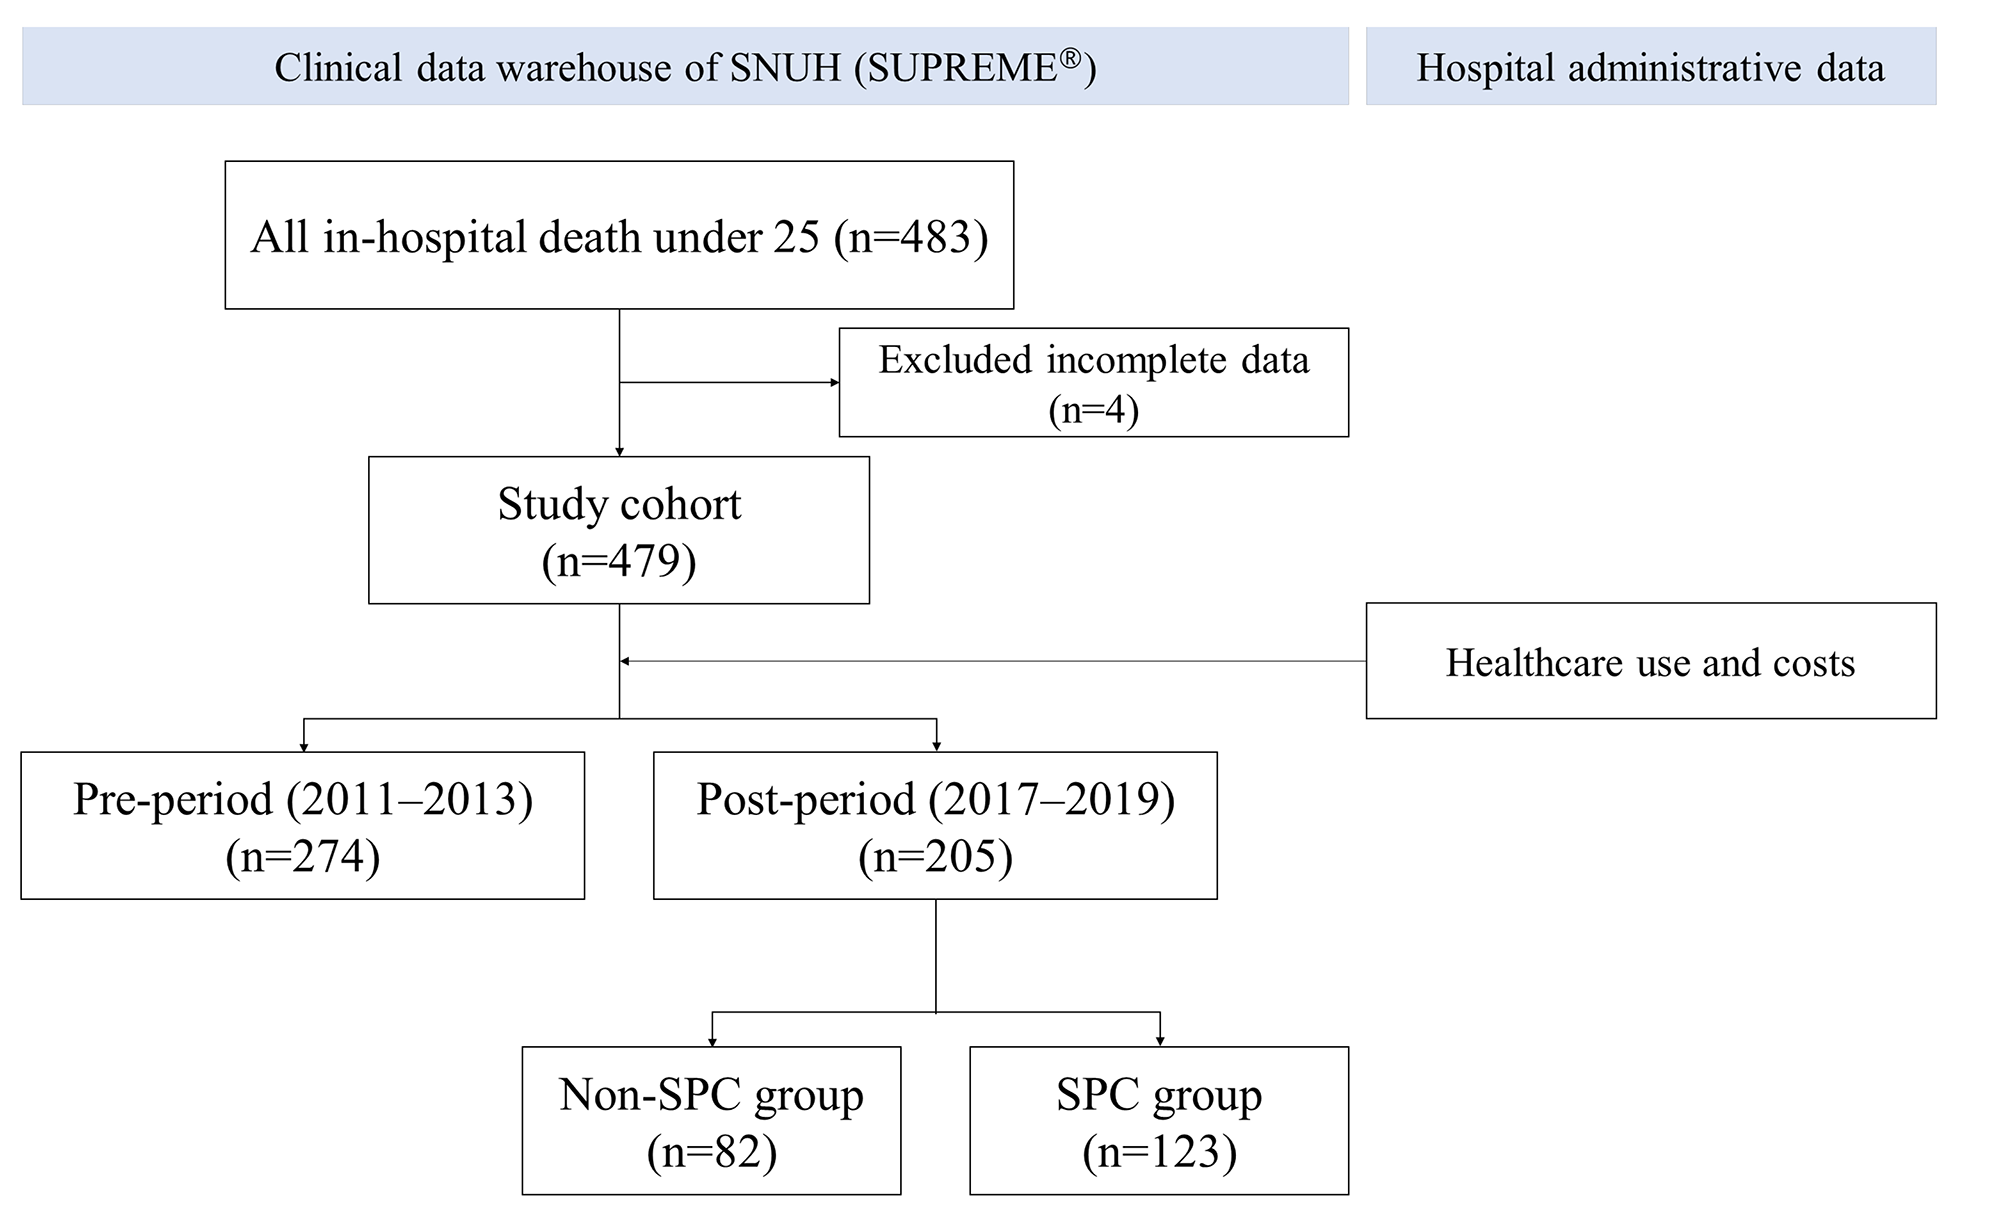 The impact of specialized pediatric palliative care on advance care planning and healthcare utilization in children and young adults: a retrospective analysis of medical records of in-hospital deaths